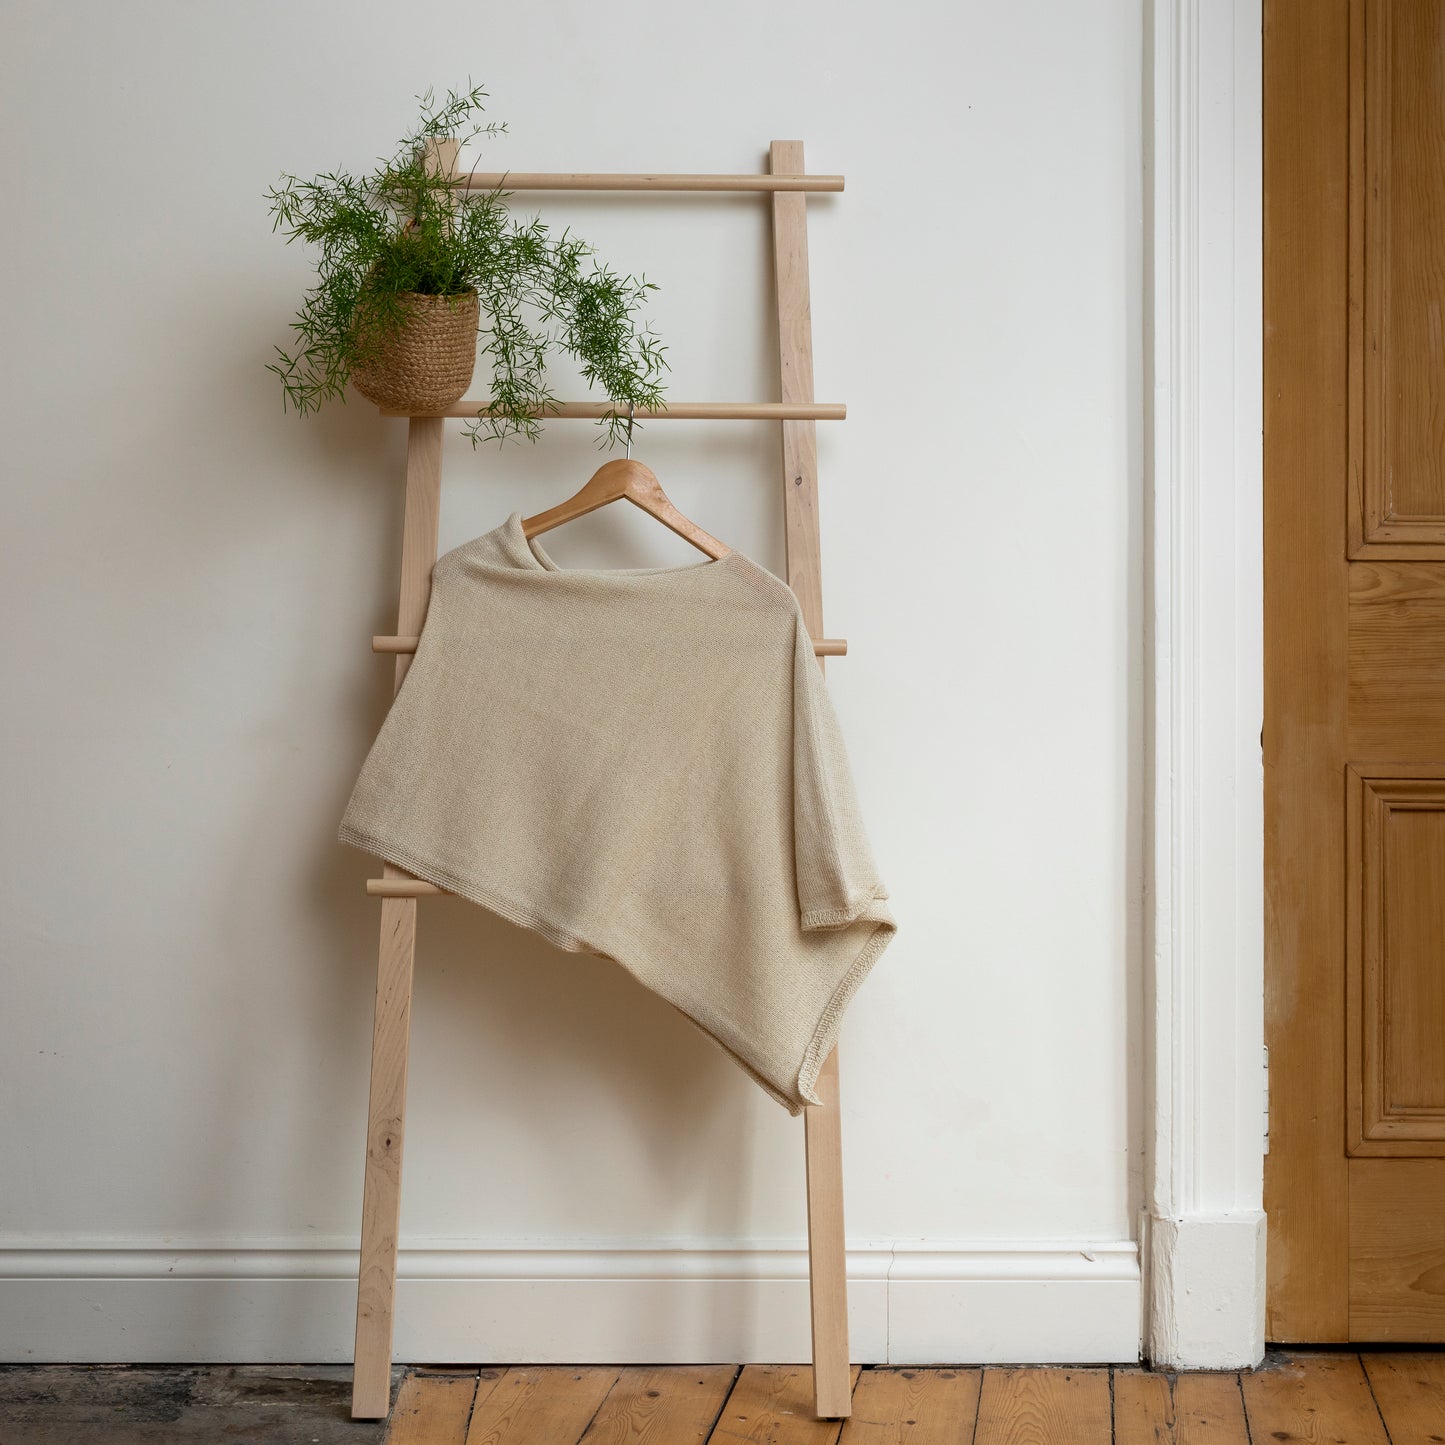 Asymmetrical natural coloured luxury knitted poncho hanging on wooden ladder.